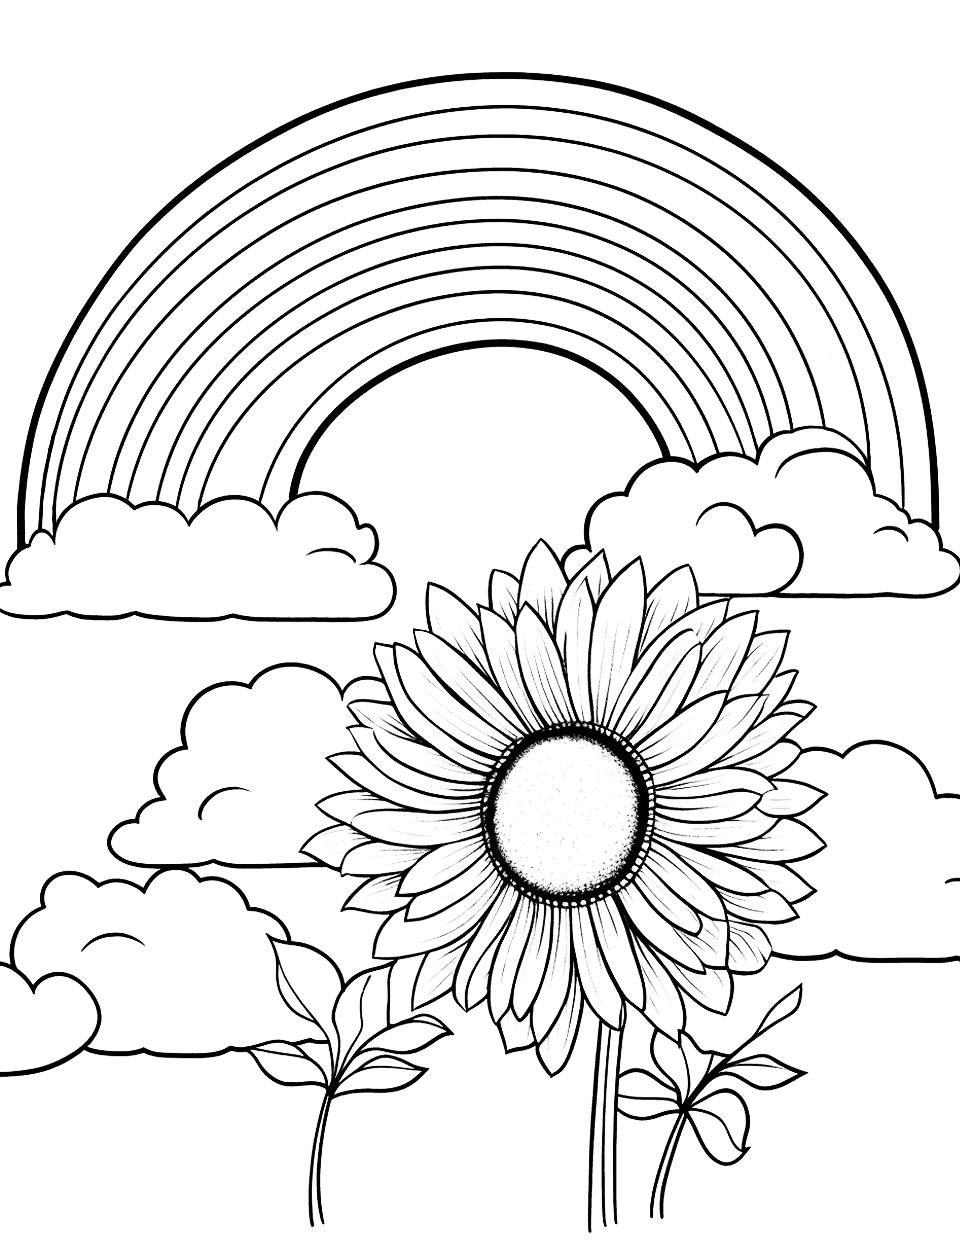 Sunflower Under the Rainbow Coloring Page - A beautiful sunflower field with a rainbow overhead.